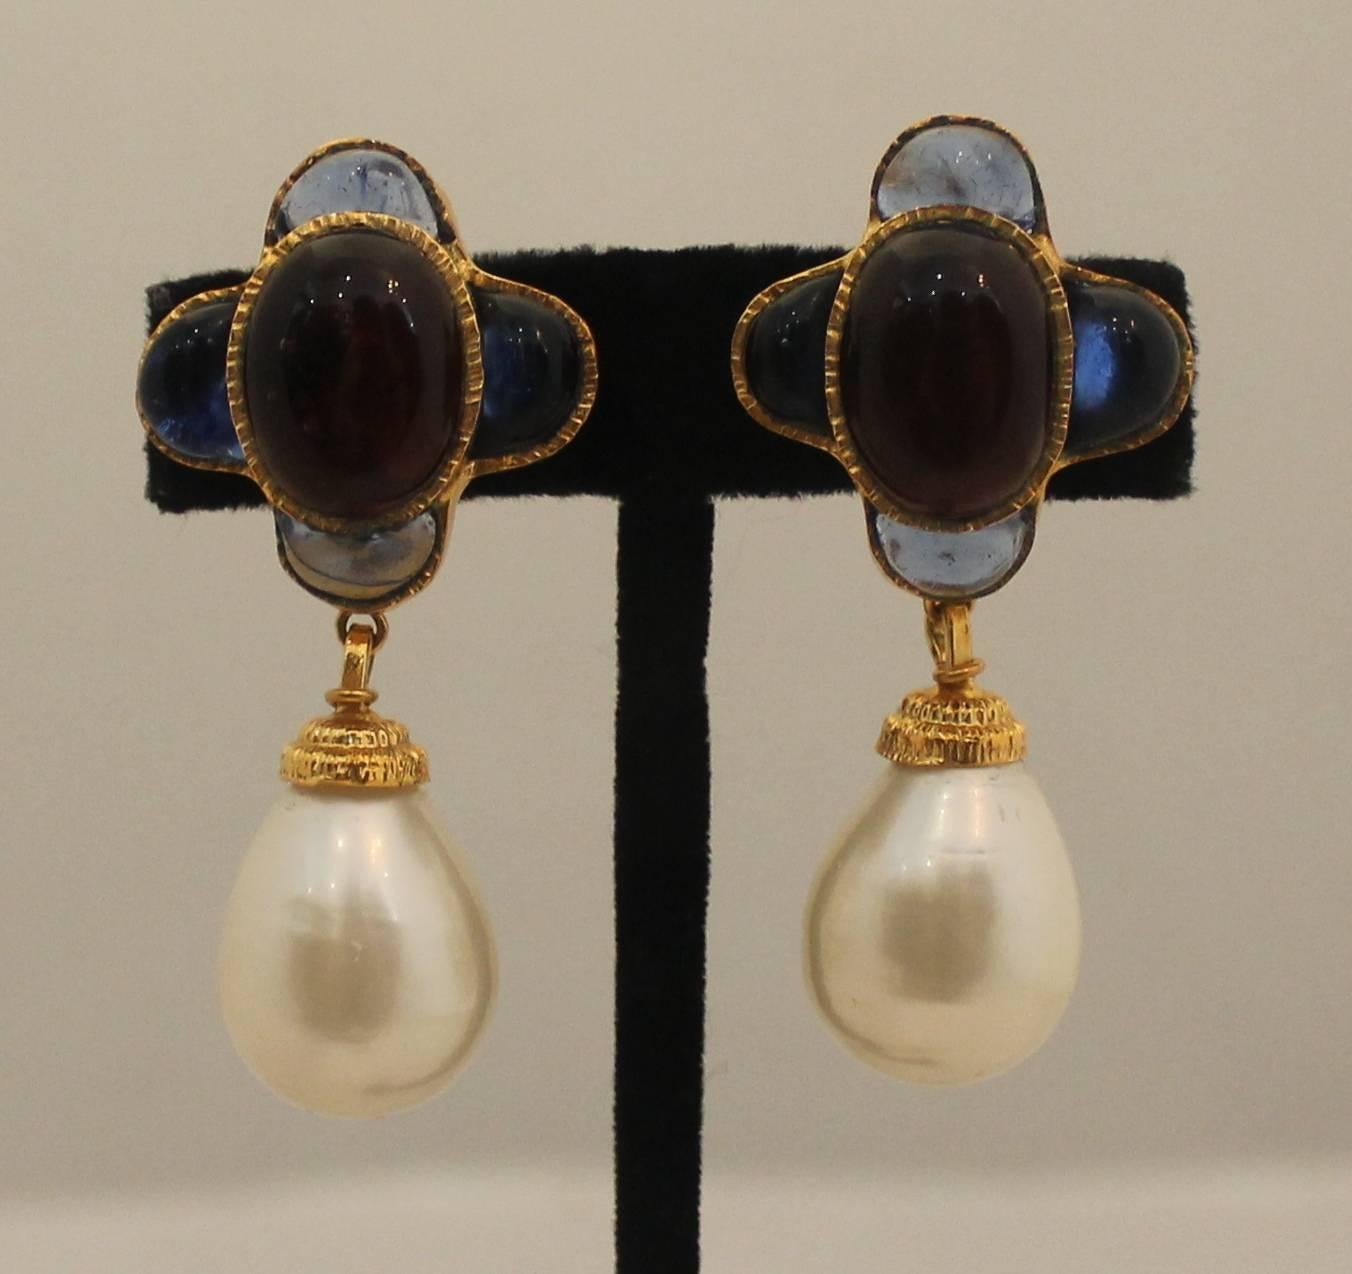 Chanel Wine & Blue Gripoix Clip-On Earrings w/ Dangling Pearl - Circa 1997.  These gorgeous Chanel earrings are in very good vintage condition with only a slightly chipped section on the bottom of one of the pearls.  They feature wine and blue